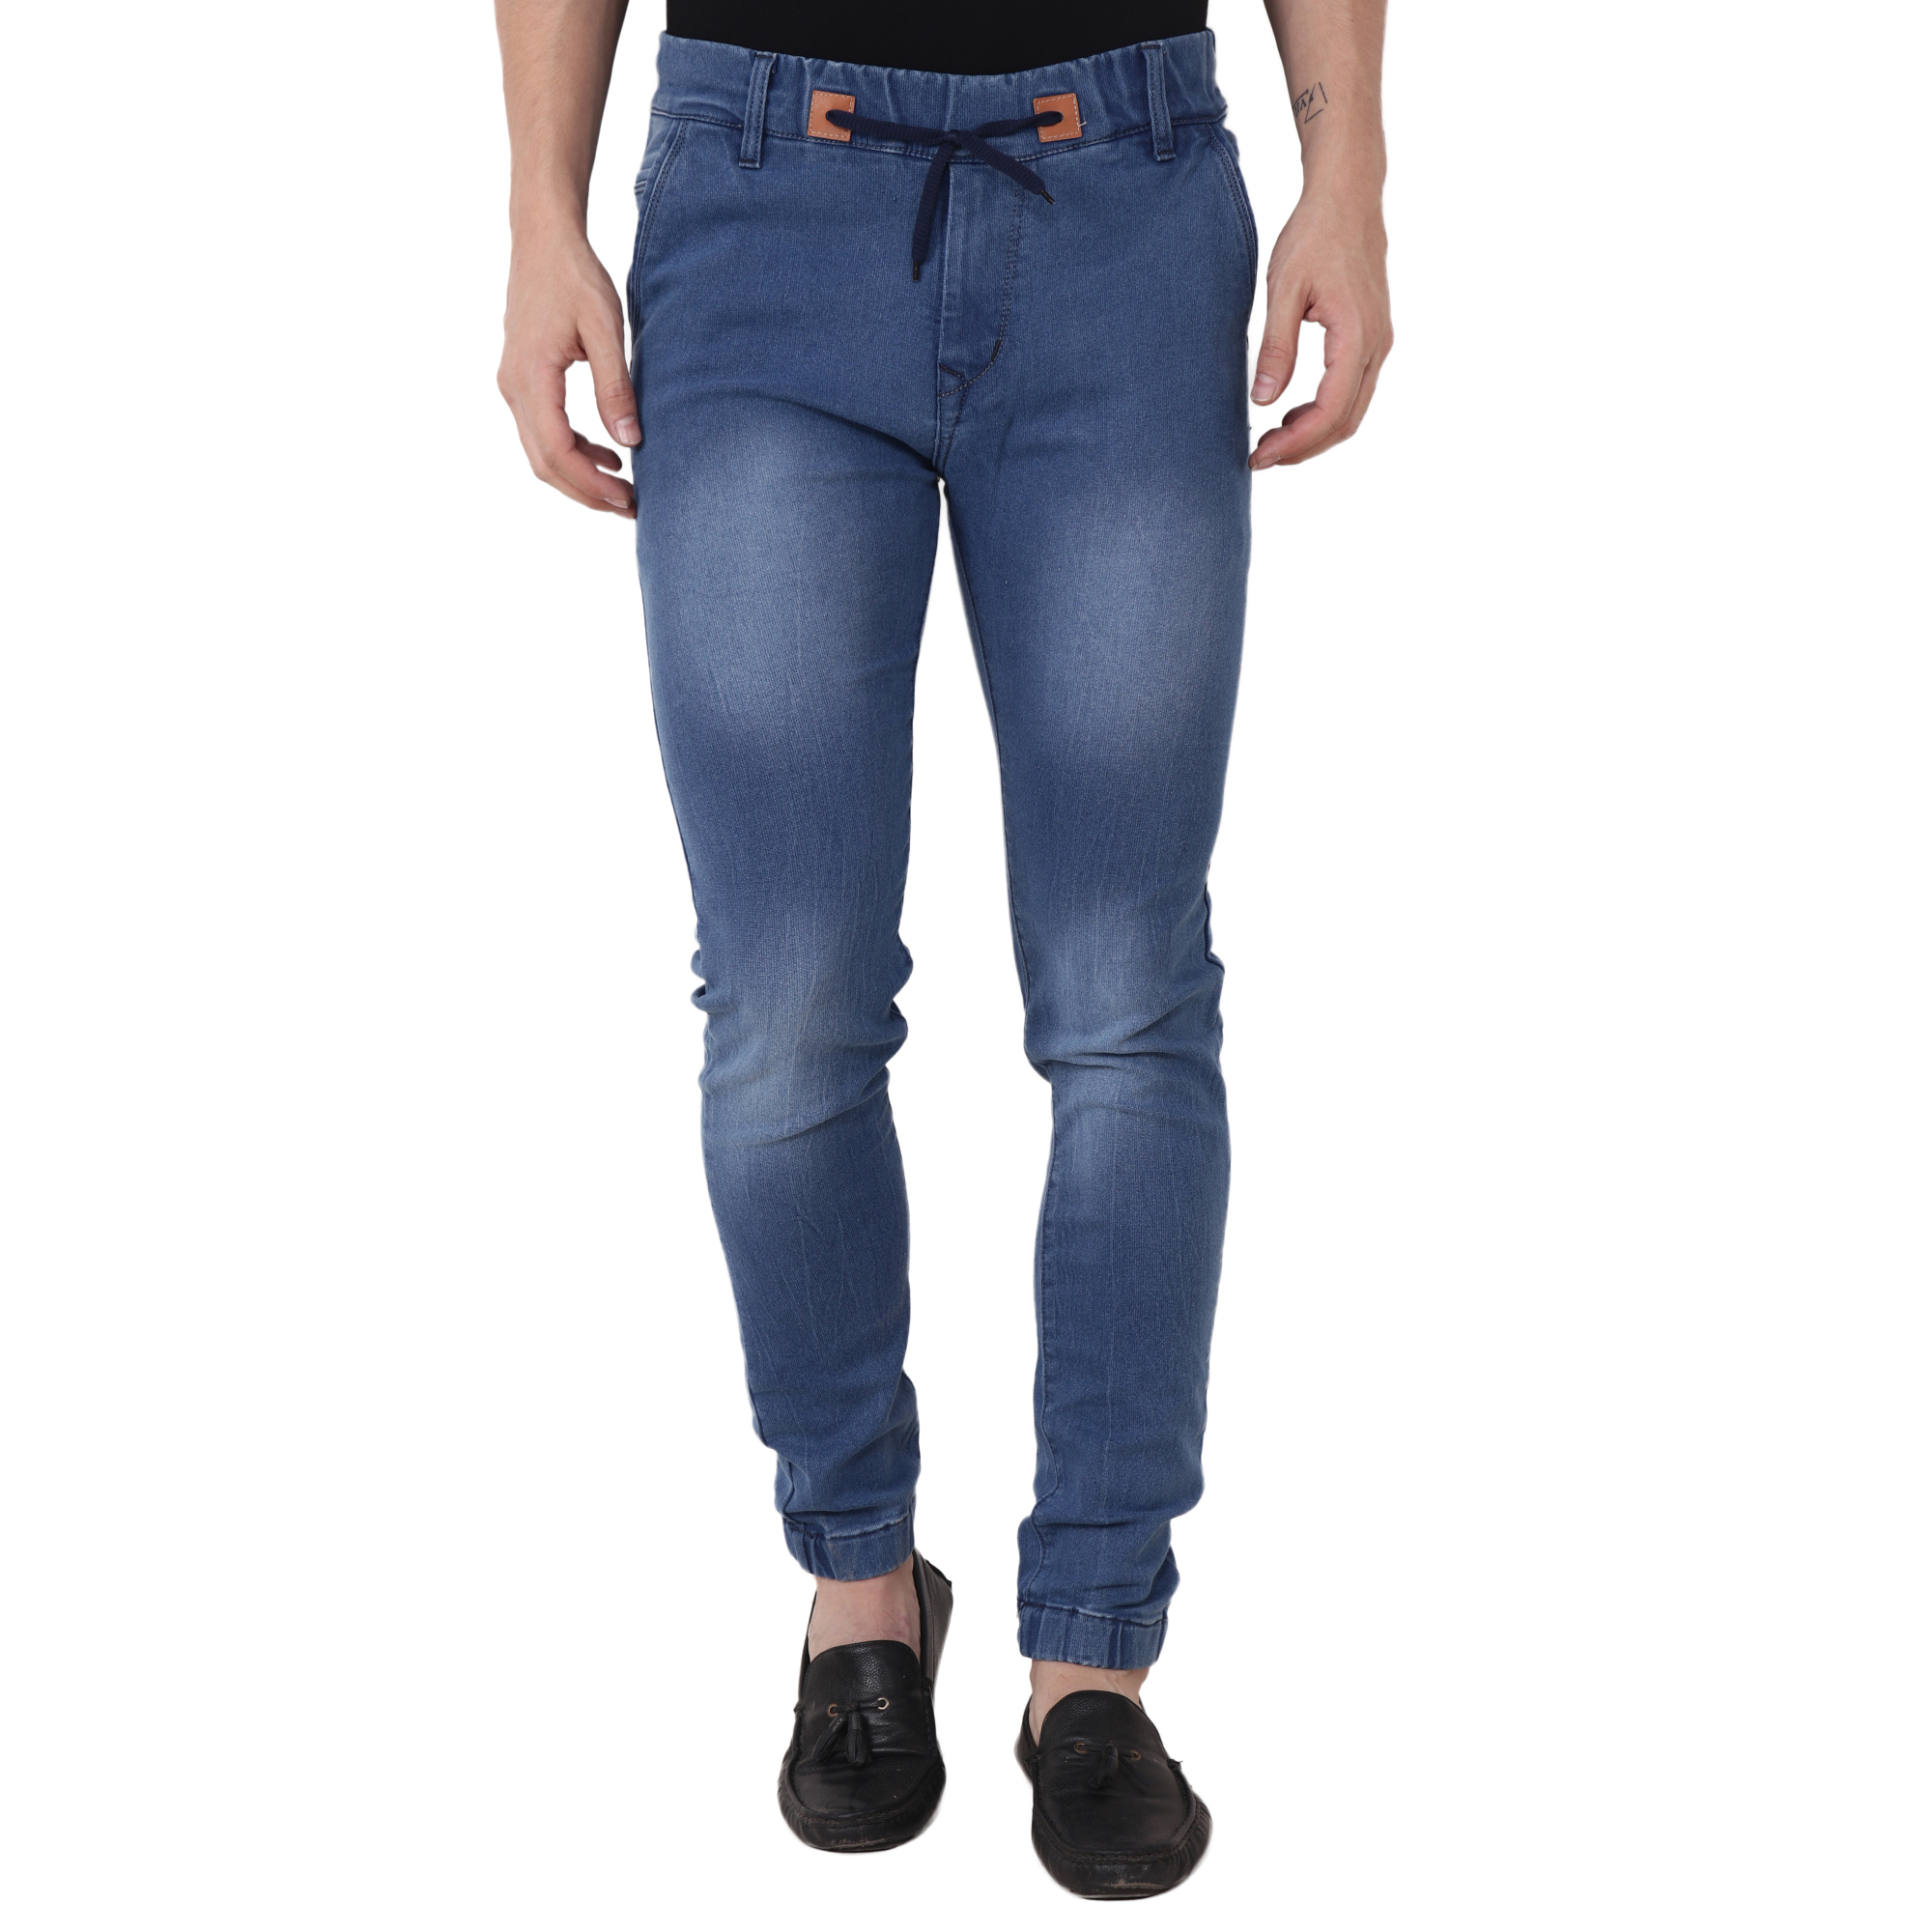 Buy Zaysh mens Jogger Online @ ₹699 from ShopClues